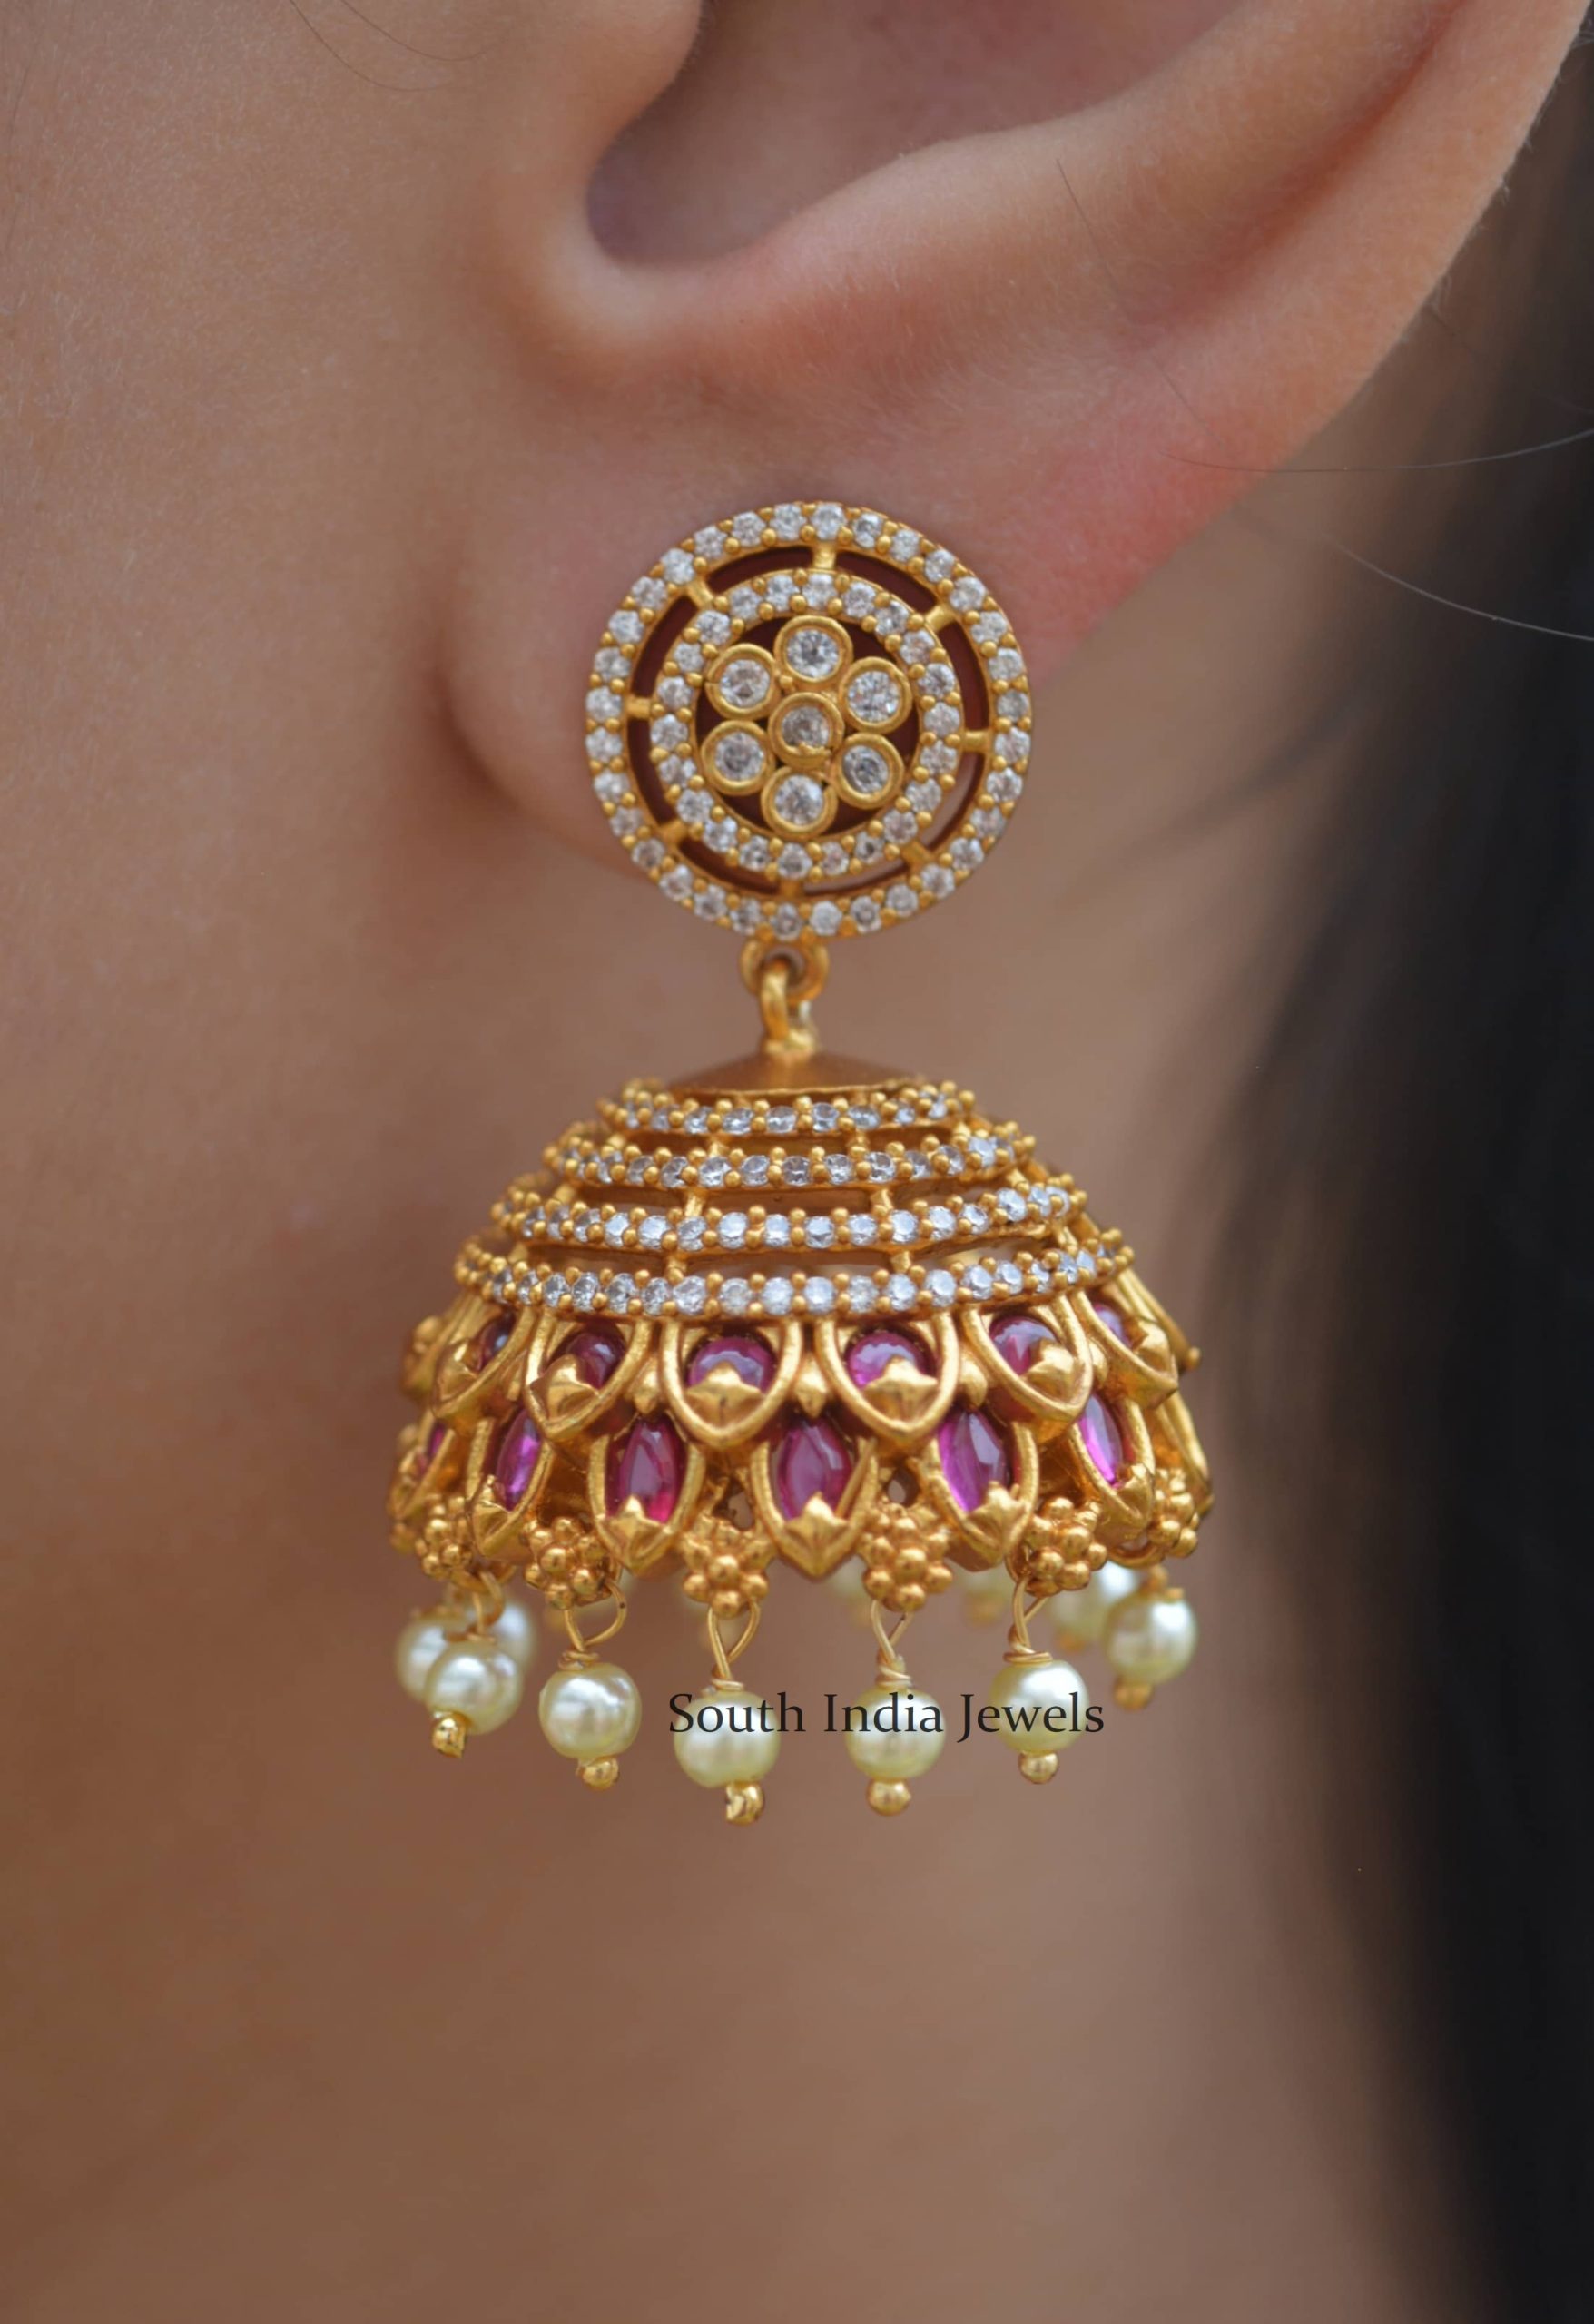 Grand AD Kemp Jhumkas -South India Jewels Online Stores.